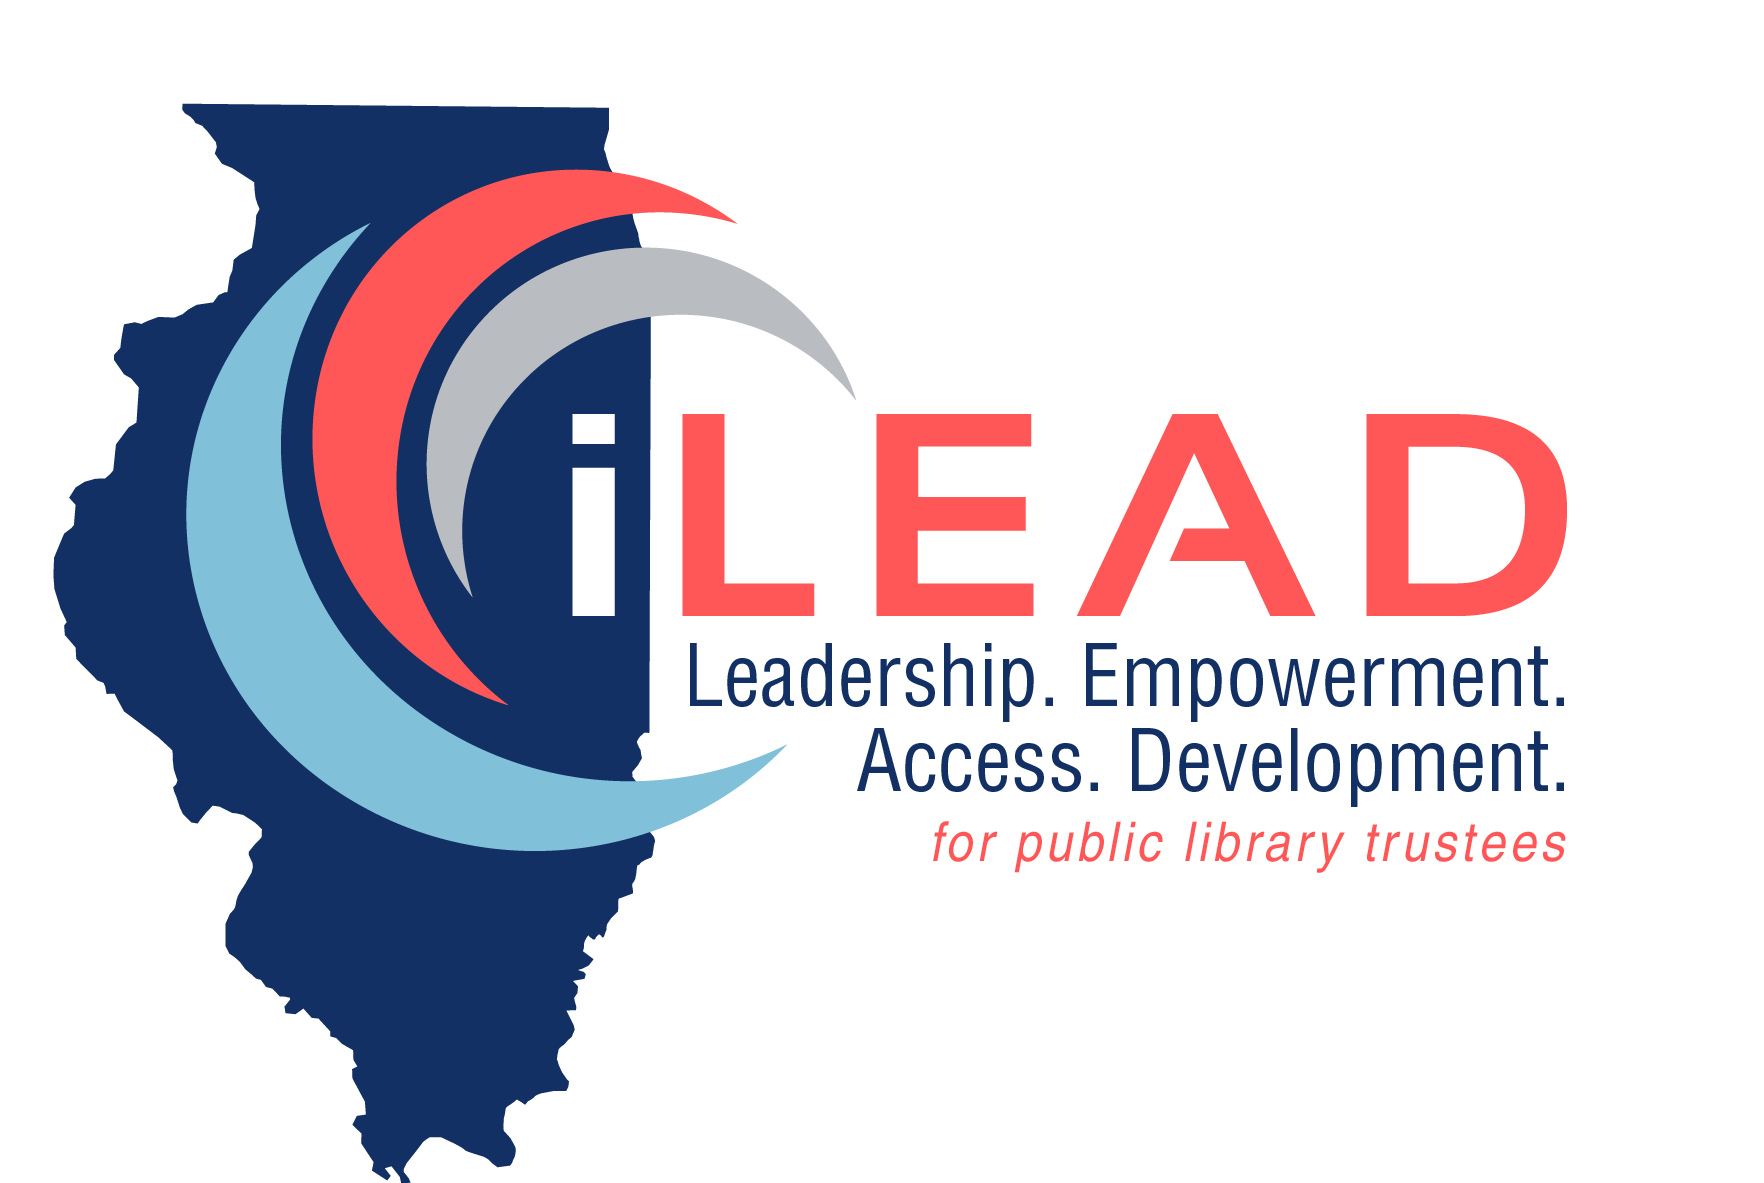 Leadership. Empowerment. Access. Development. For Public Library Trustees.